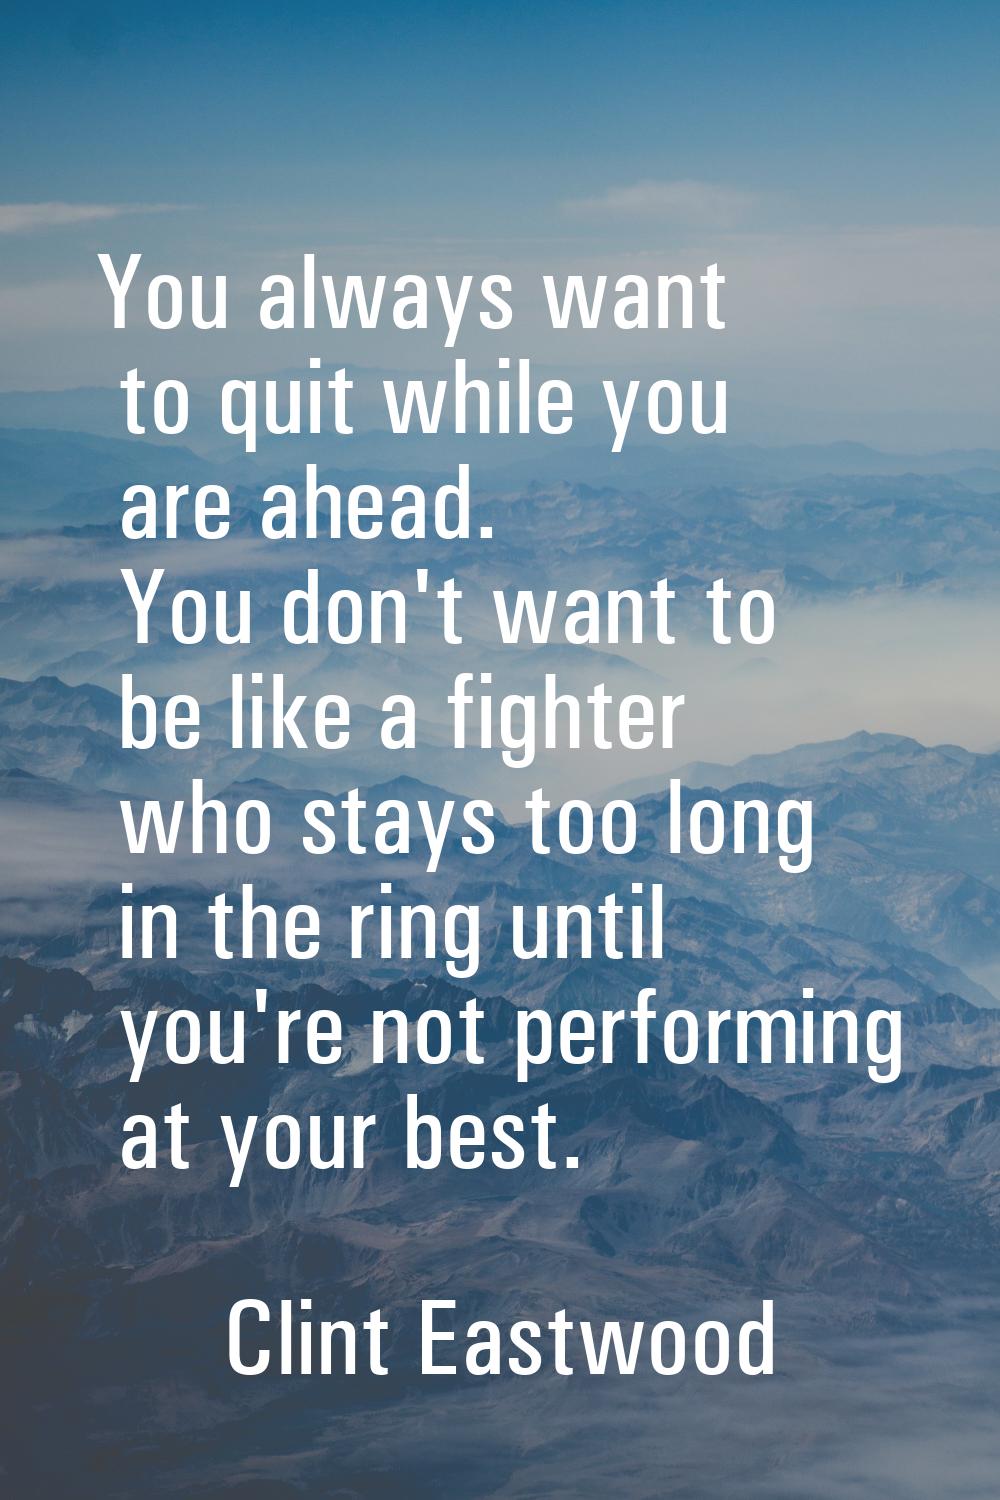 You always want to quit while you are ahead. You don't want to be like a fighter who stays too long